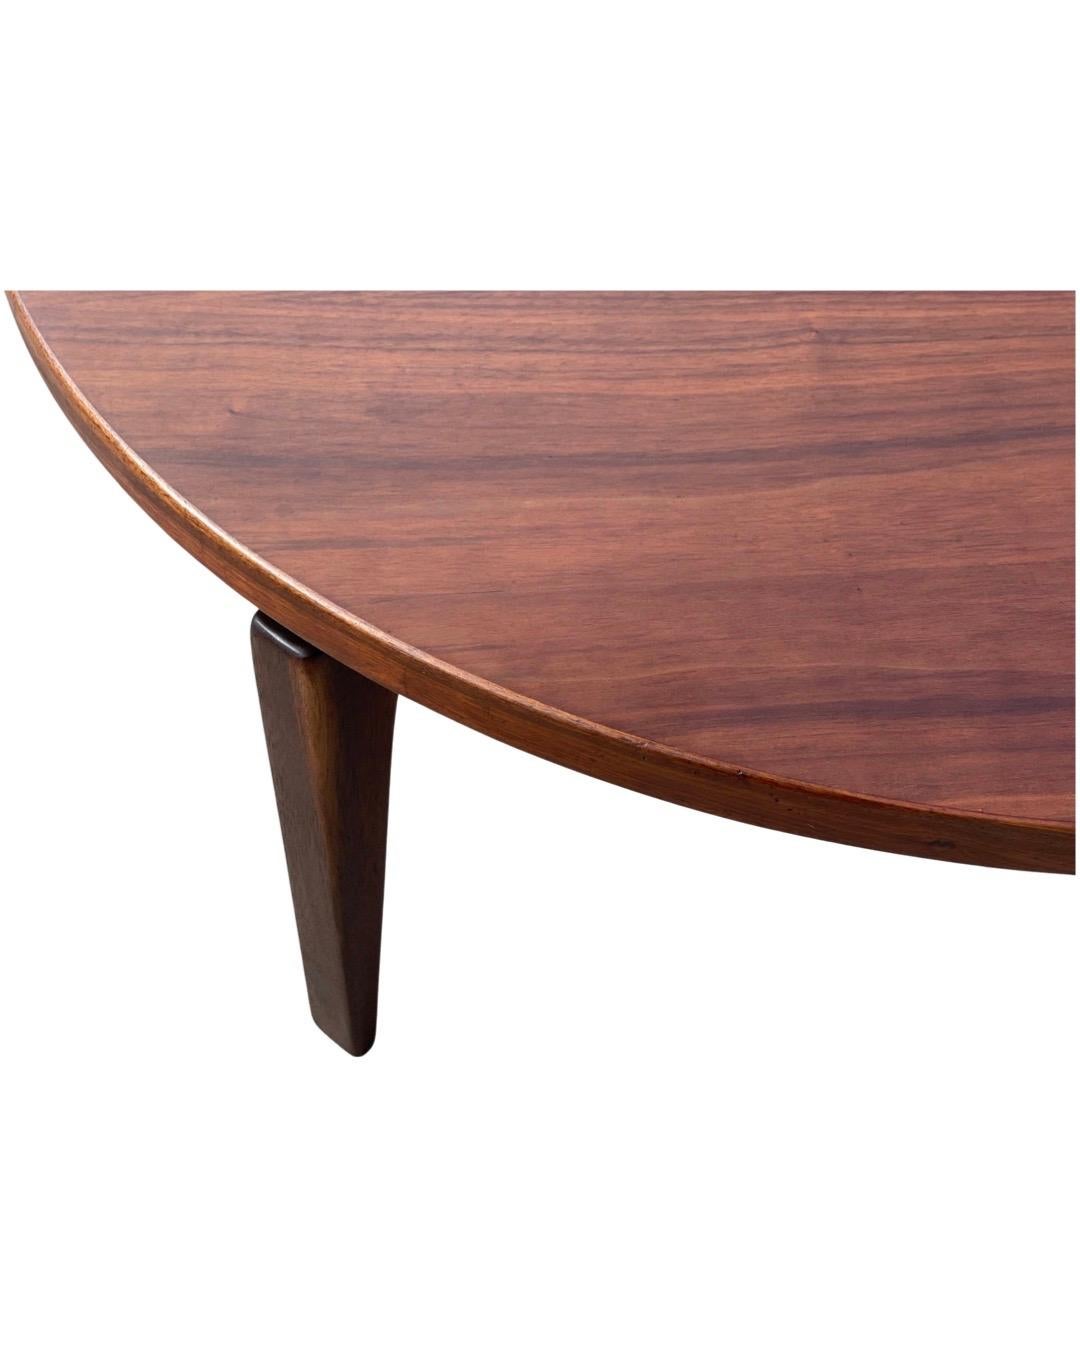 North American Midcentury Round Coffee Table by Jens Risom in Walnut, Rotating Lazy Susan